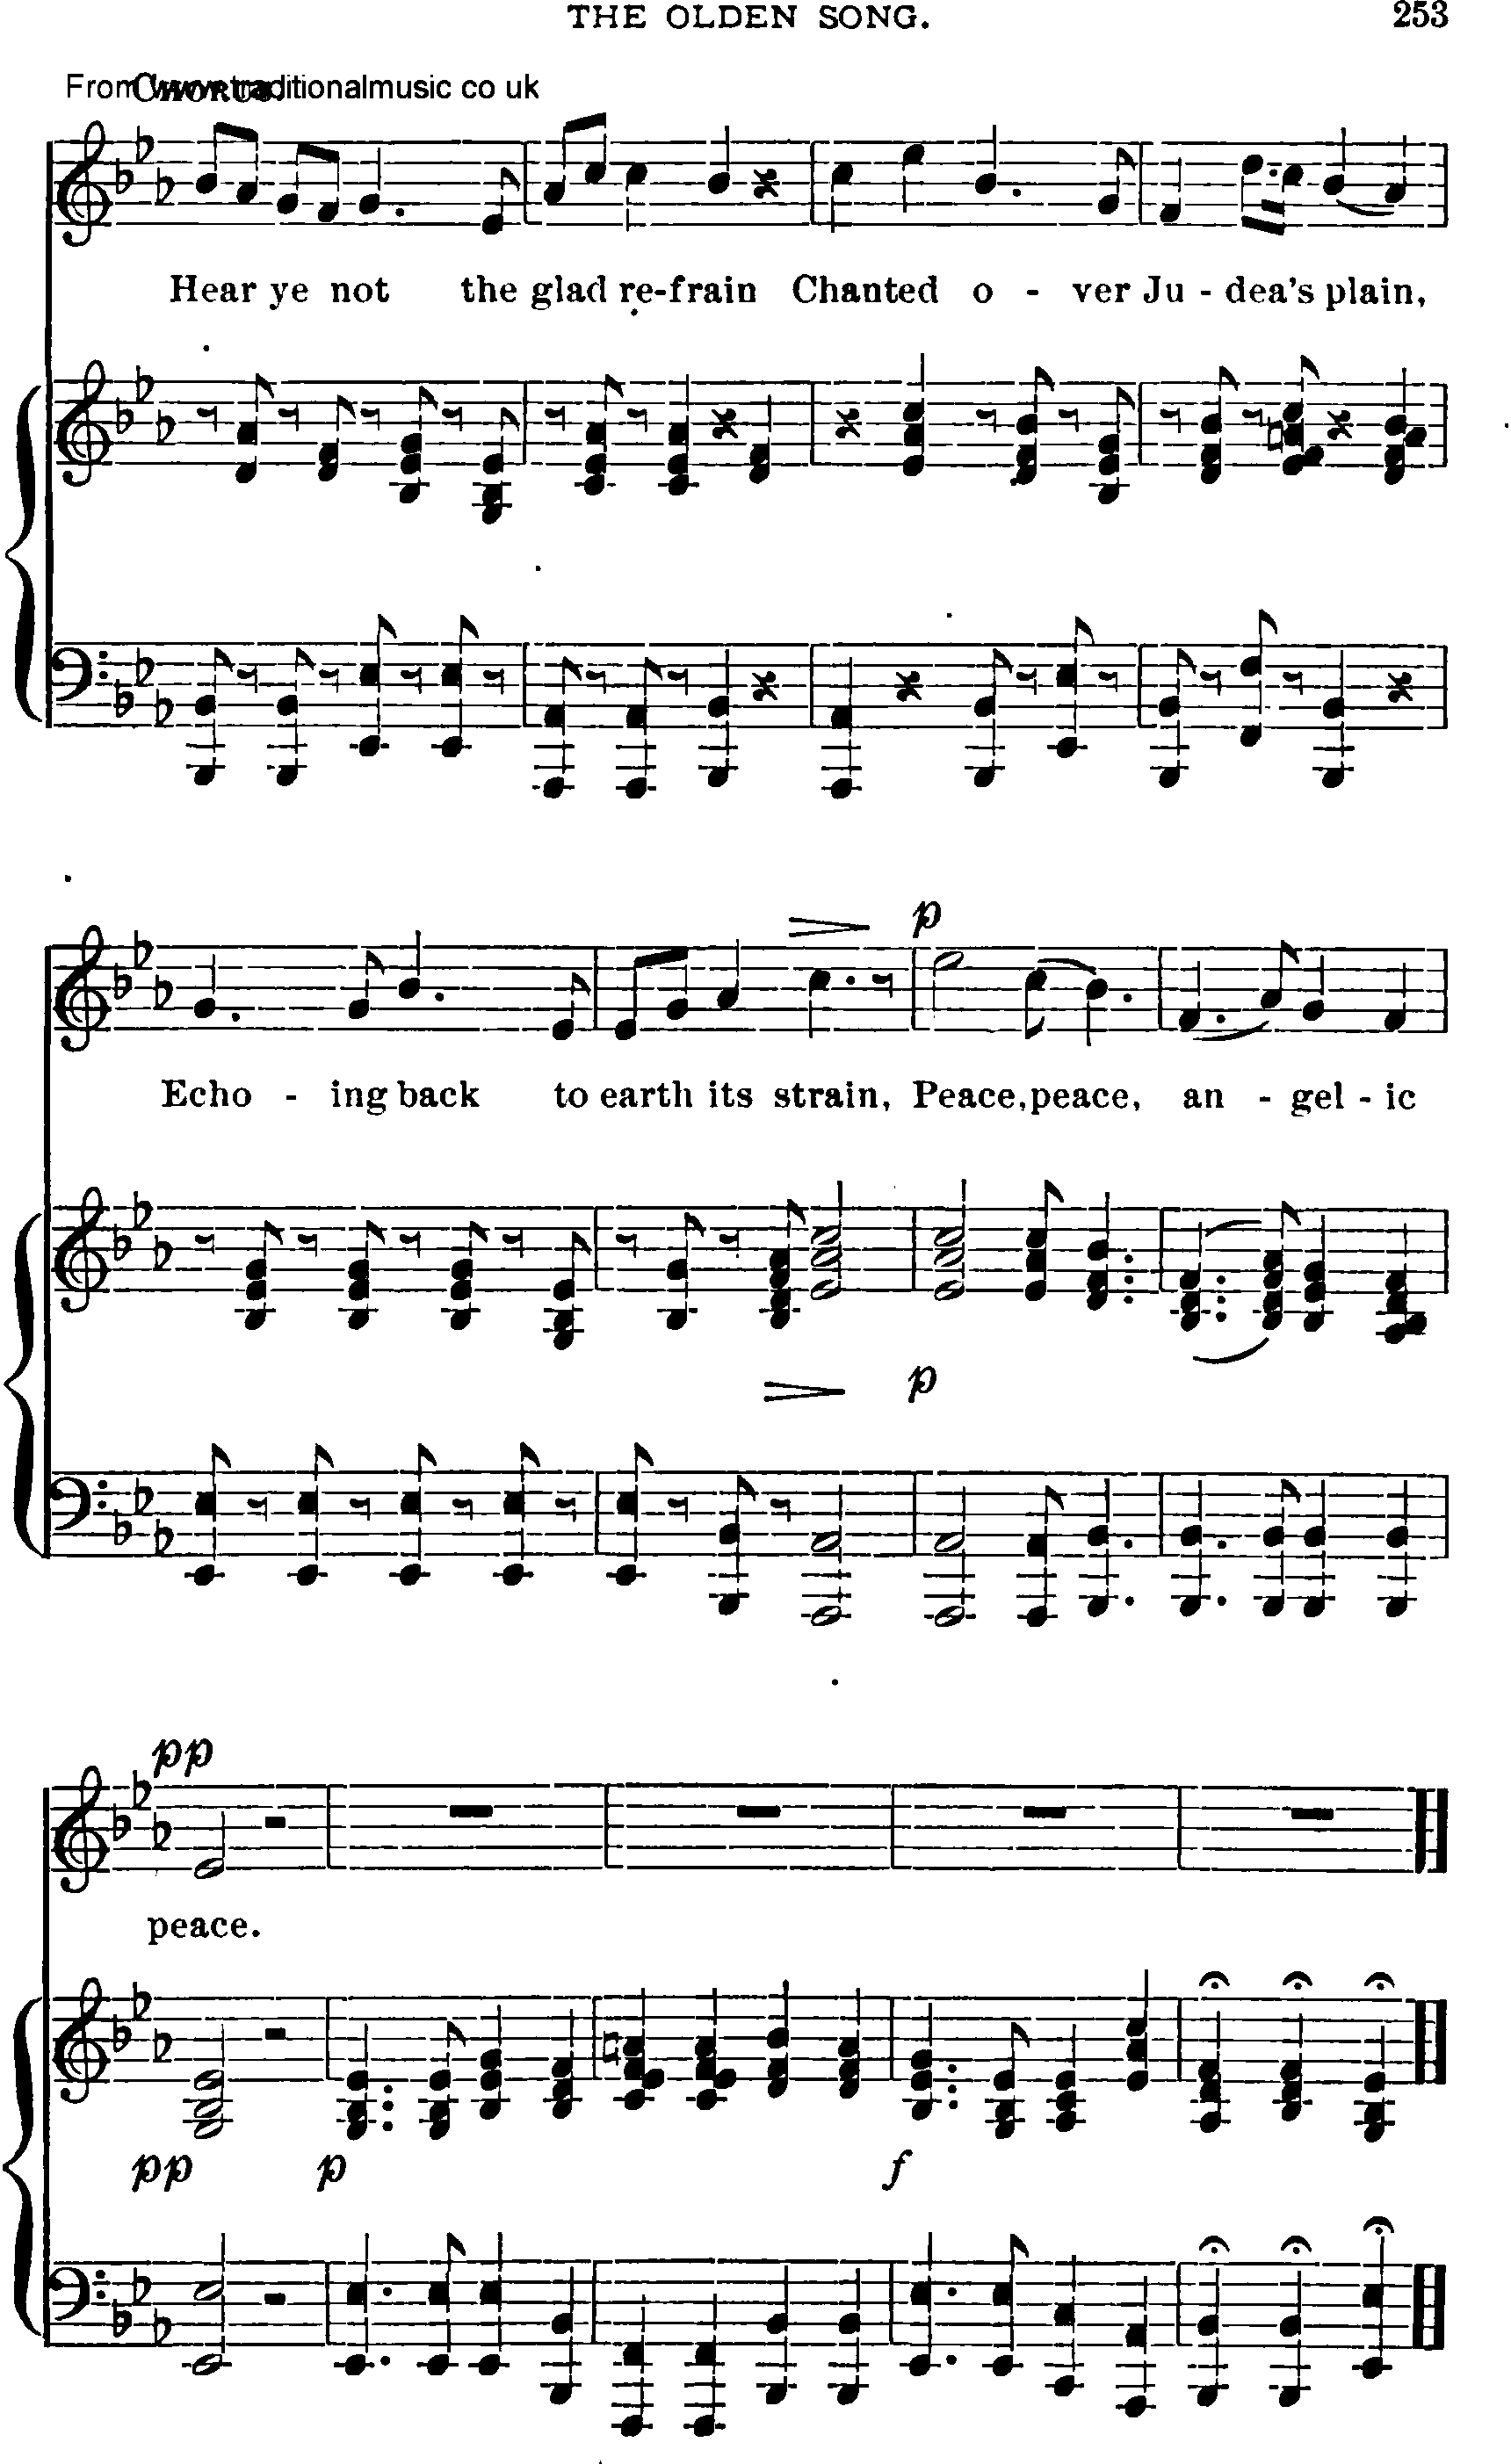 Shaker Music collection, Hymn: the olden song, sheetmusic and PDF